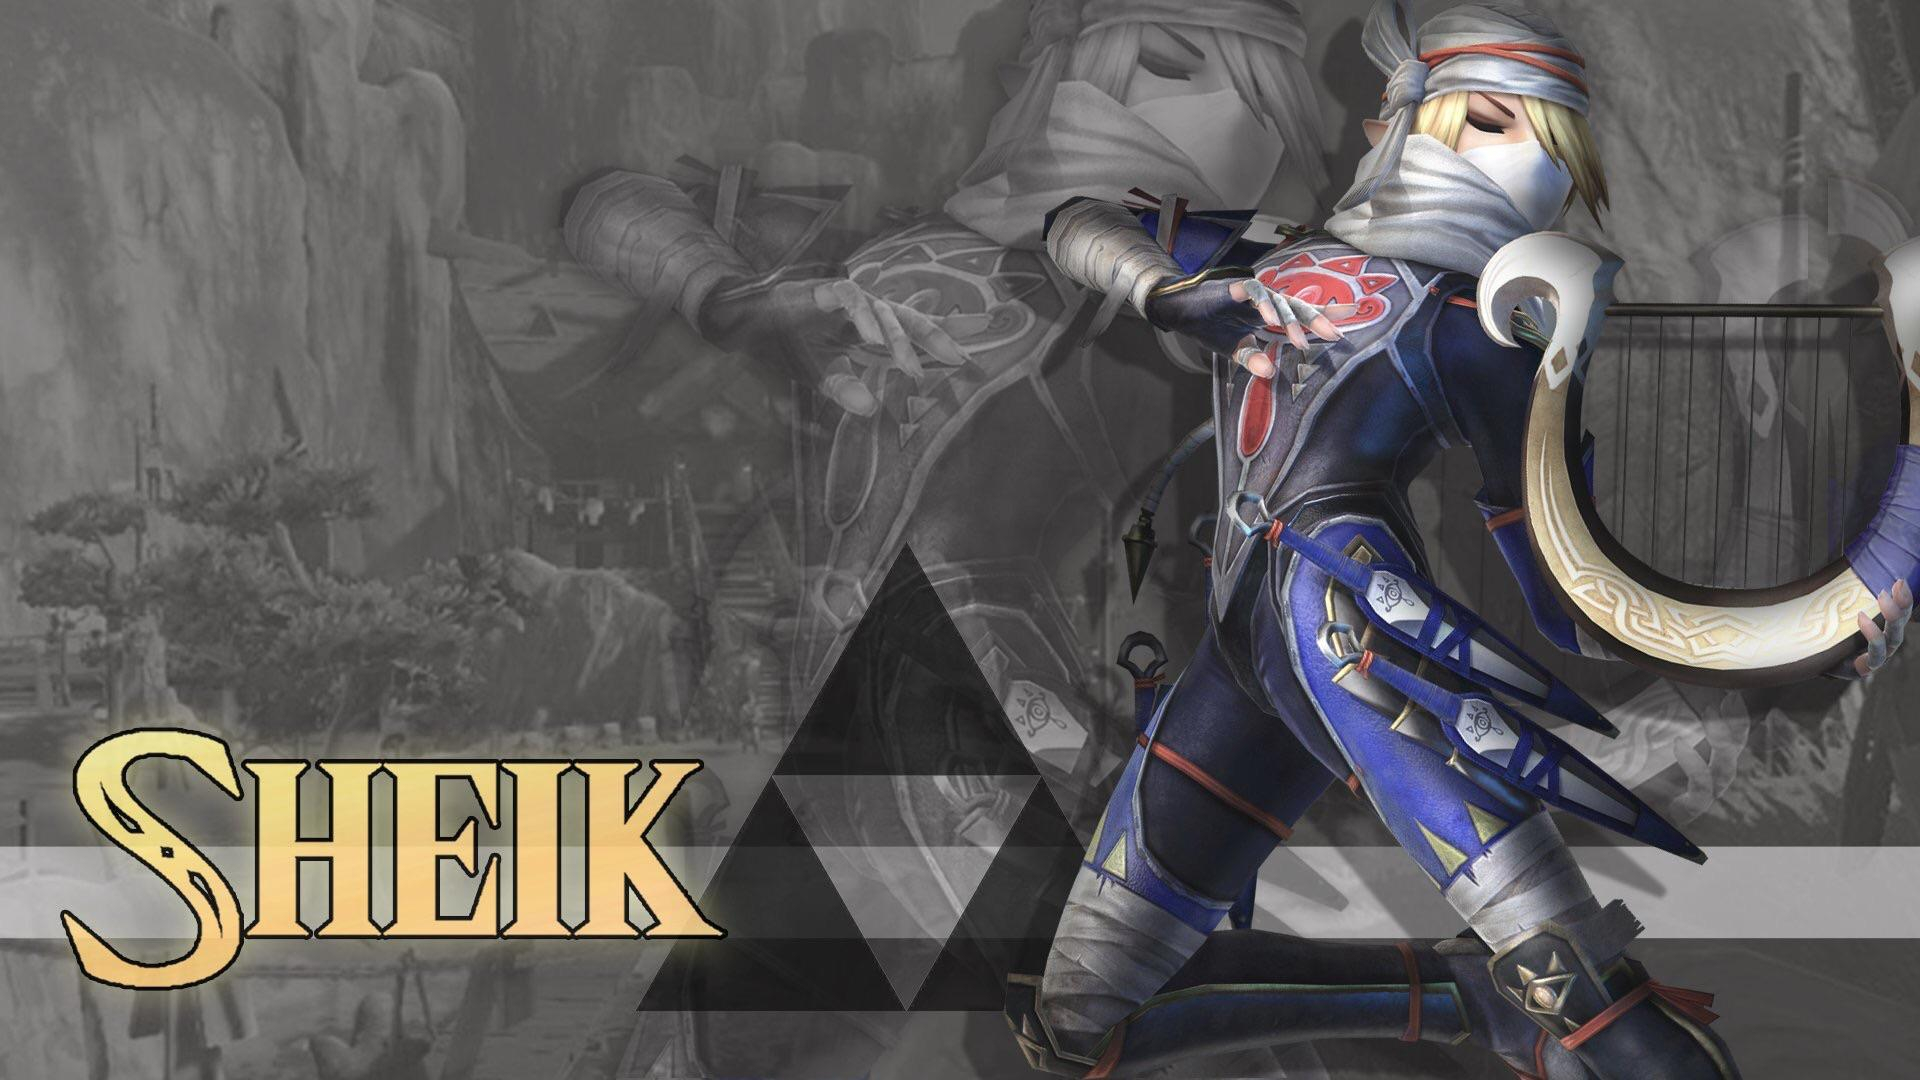 1920x1080 I've been playing a lot as Sheik recently so I made a wallpaper for her! : r/HyruleWarriors